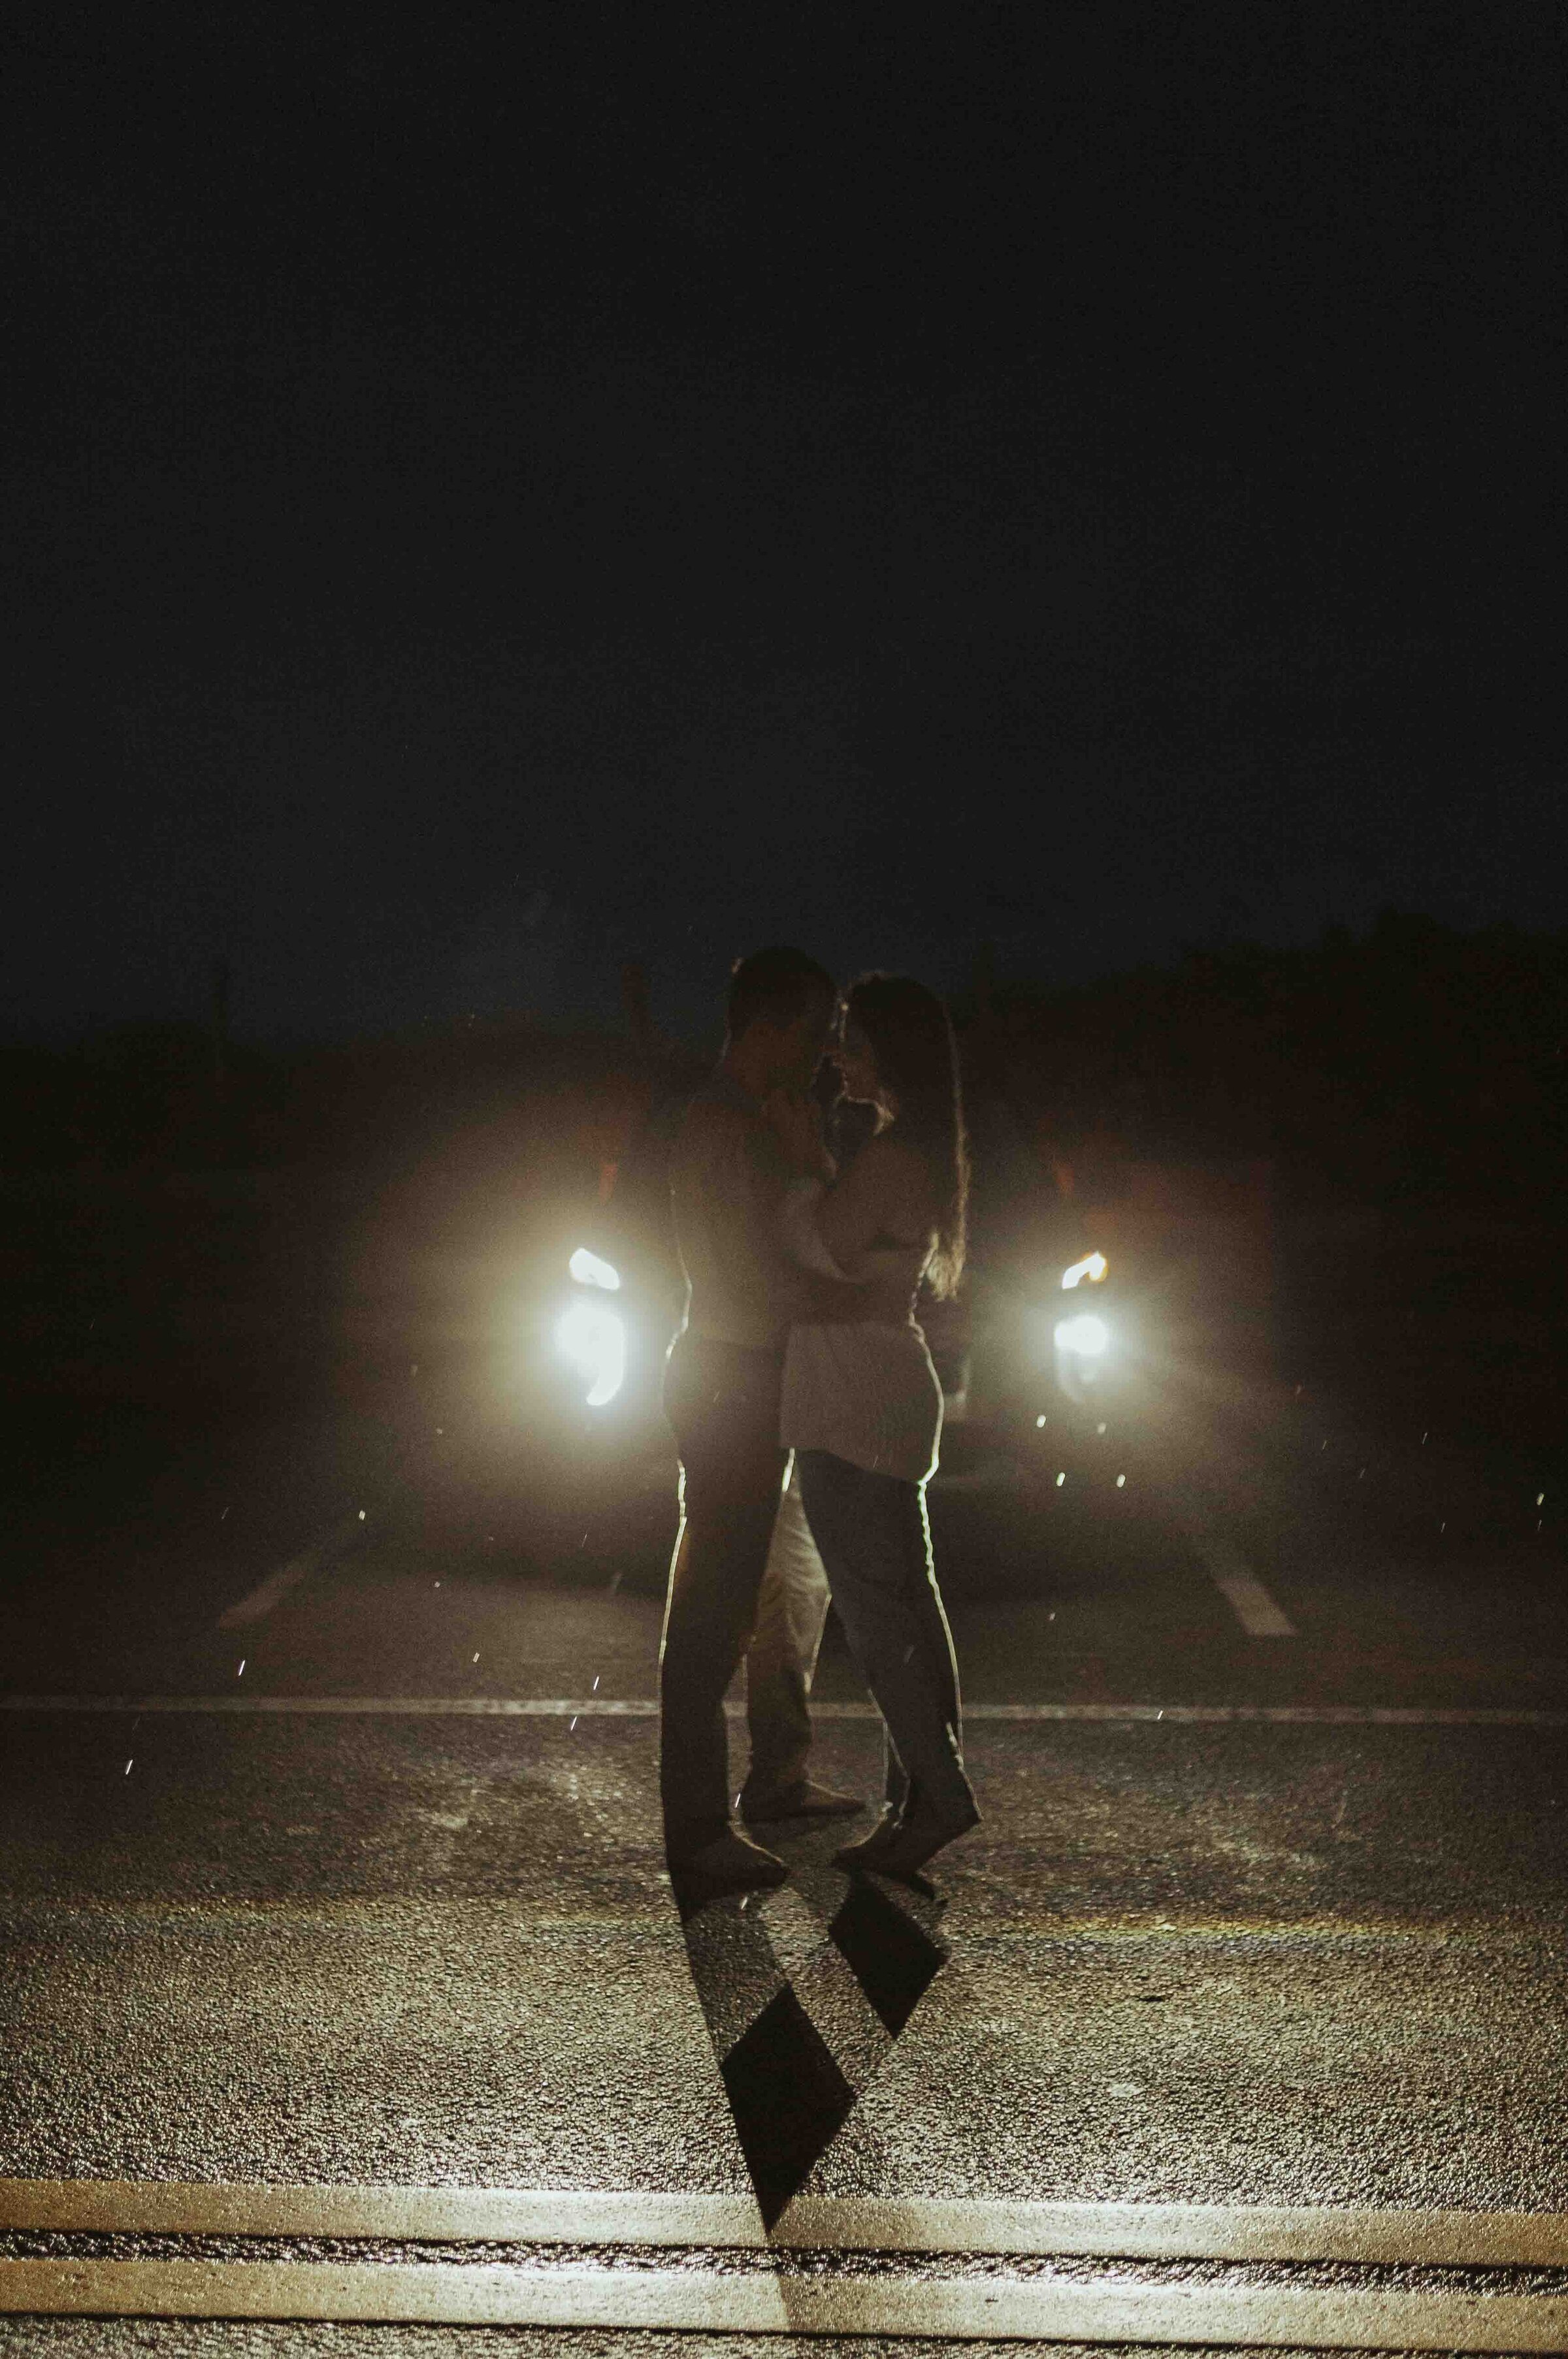 Couple embracing in a parking lot at night with car headlines